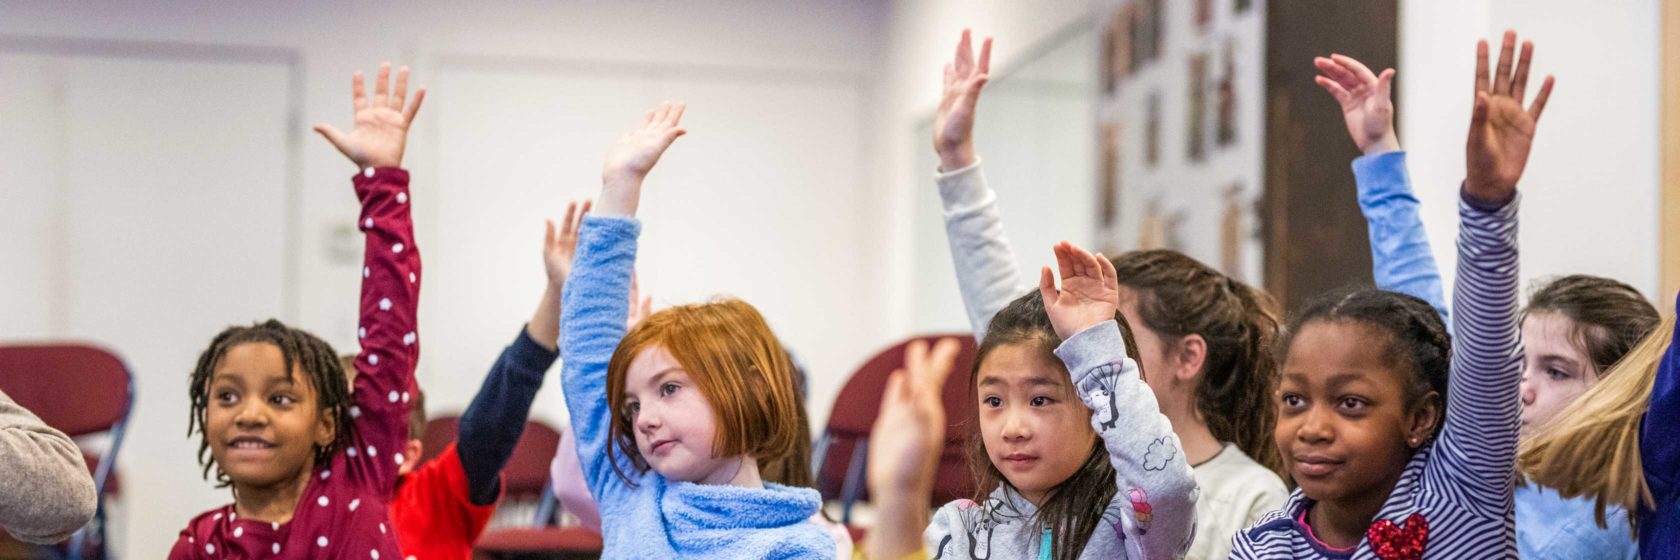 Children raising their hands to ask questions while in class.